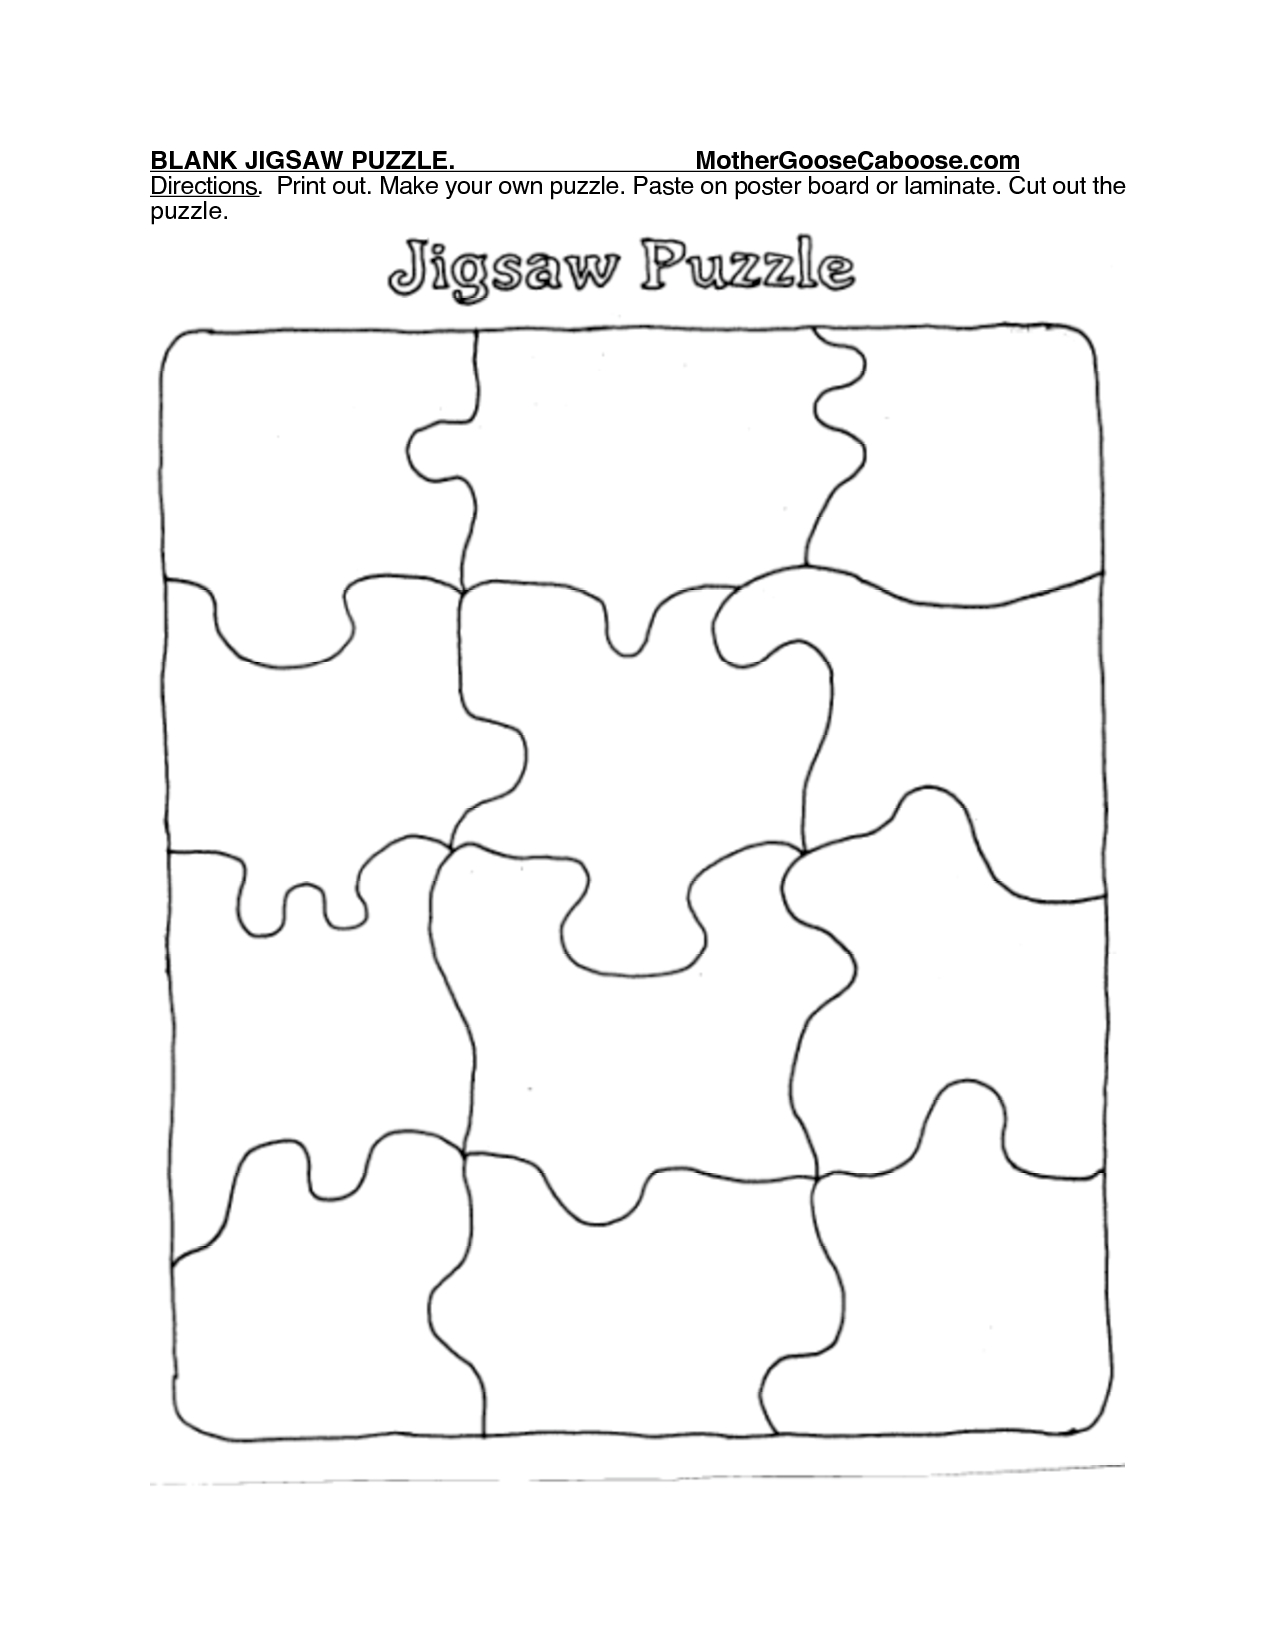 Printable Puzzle Piece Template | Search Results | New Calendar - Printable Jigsaw Puzzle For Adults